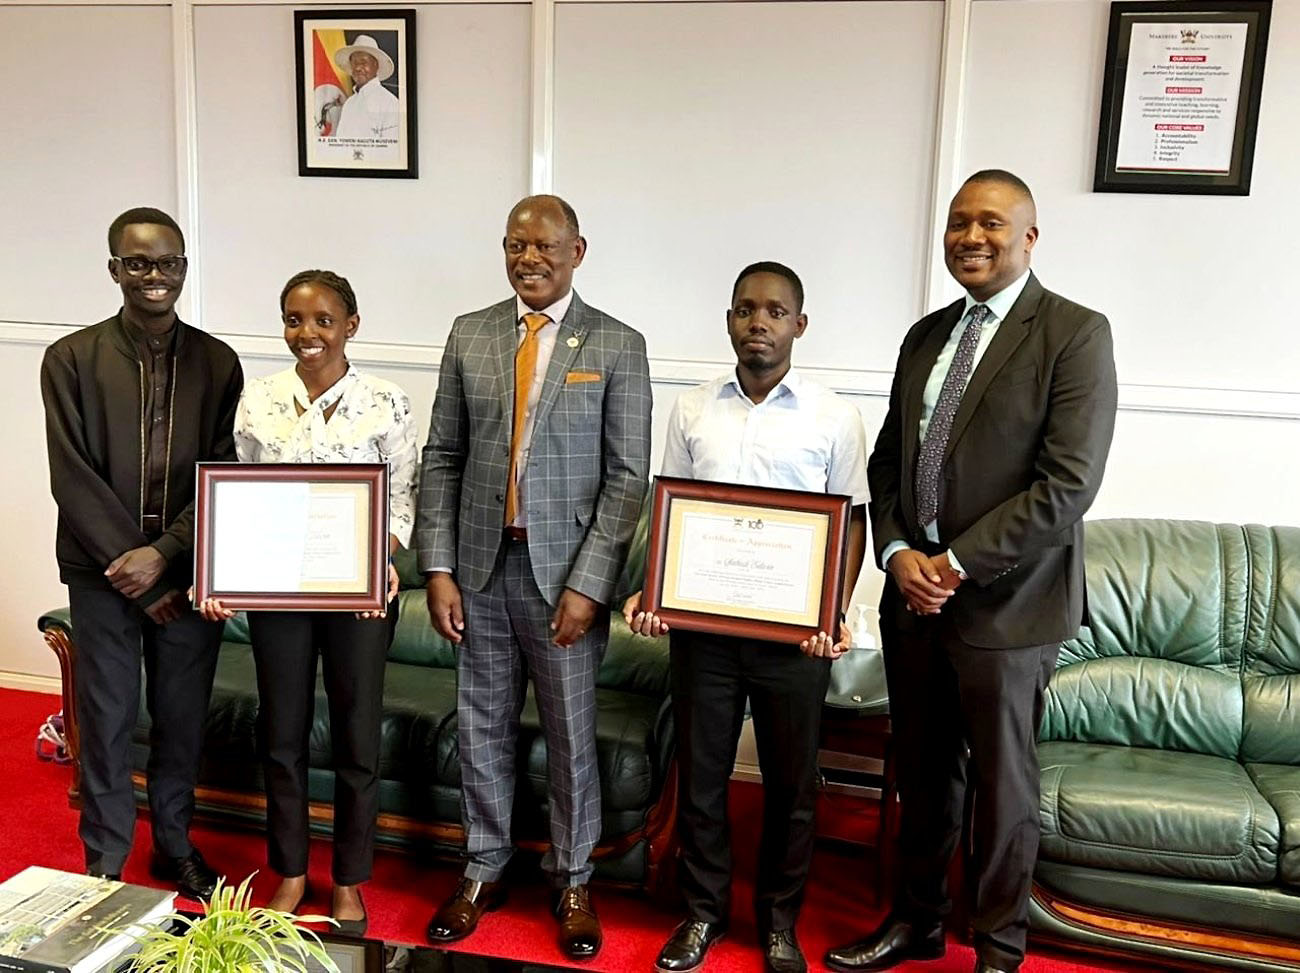 The Vice Chancellor-Professor Barnabas Nawangwe (Centre) with Mak Moot Society Patron-Dr. Daniel Ruhweza (Right), SoL Alumni & Team Coach-Mr. David Kasibante (Left) and winners: Ms. Kevin Nakimbugwe (2nd Left) and Mr. Edwin Sabiiti (2nd Right) with their certificates of recognition on 4th August 2022, Frank Kalimuzo Central Teaching Facility, Makerere University.